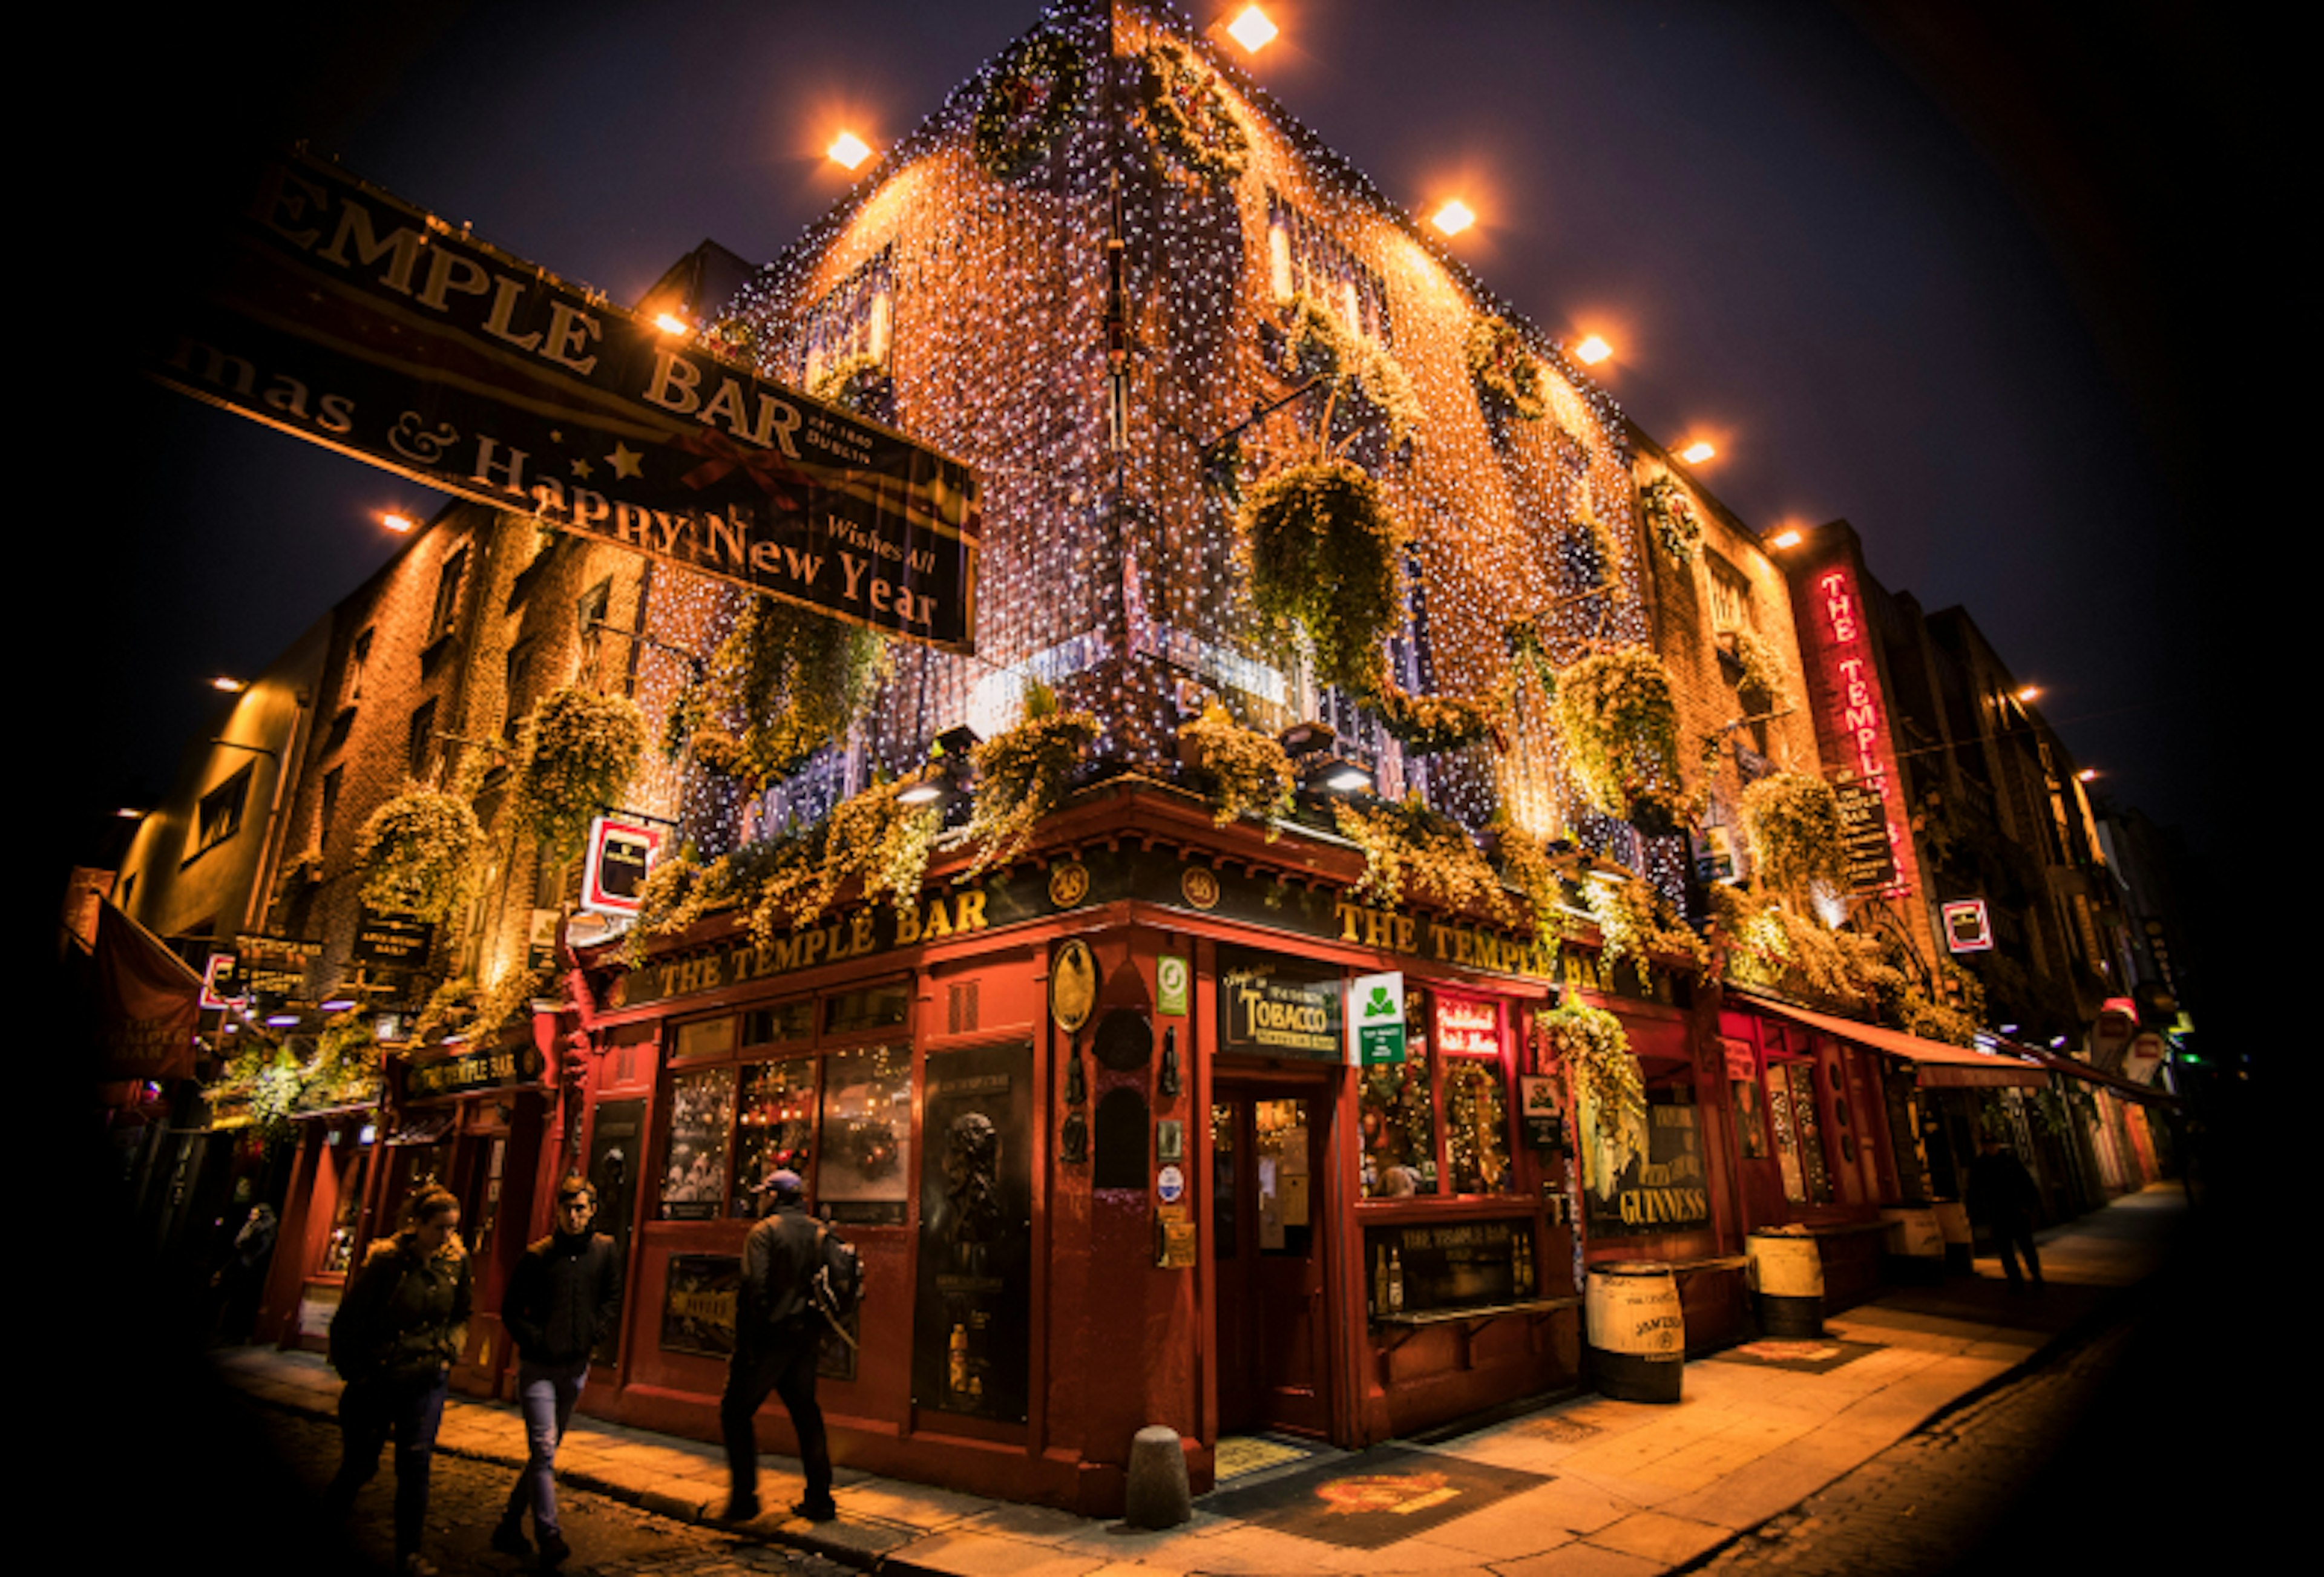 Night view from christmas time of the temple bar, Dublin